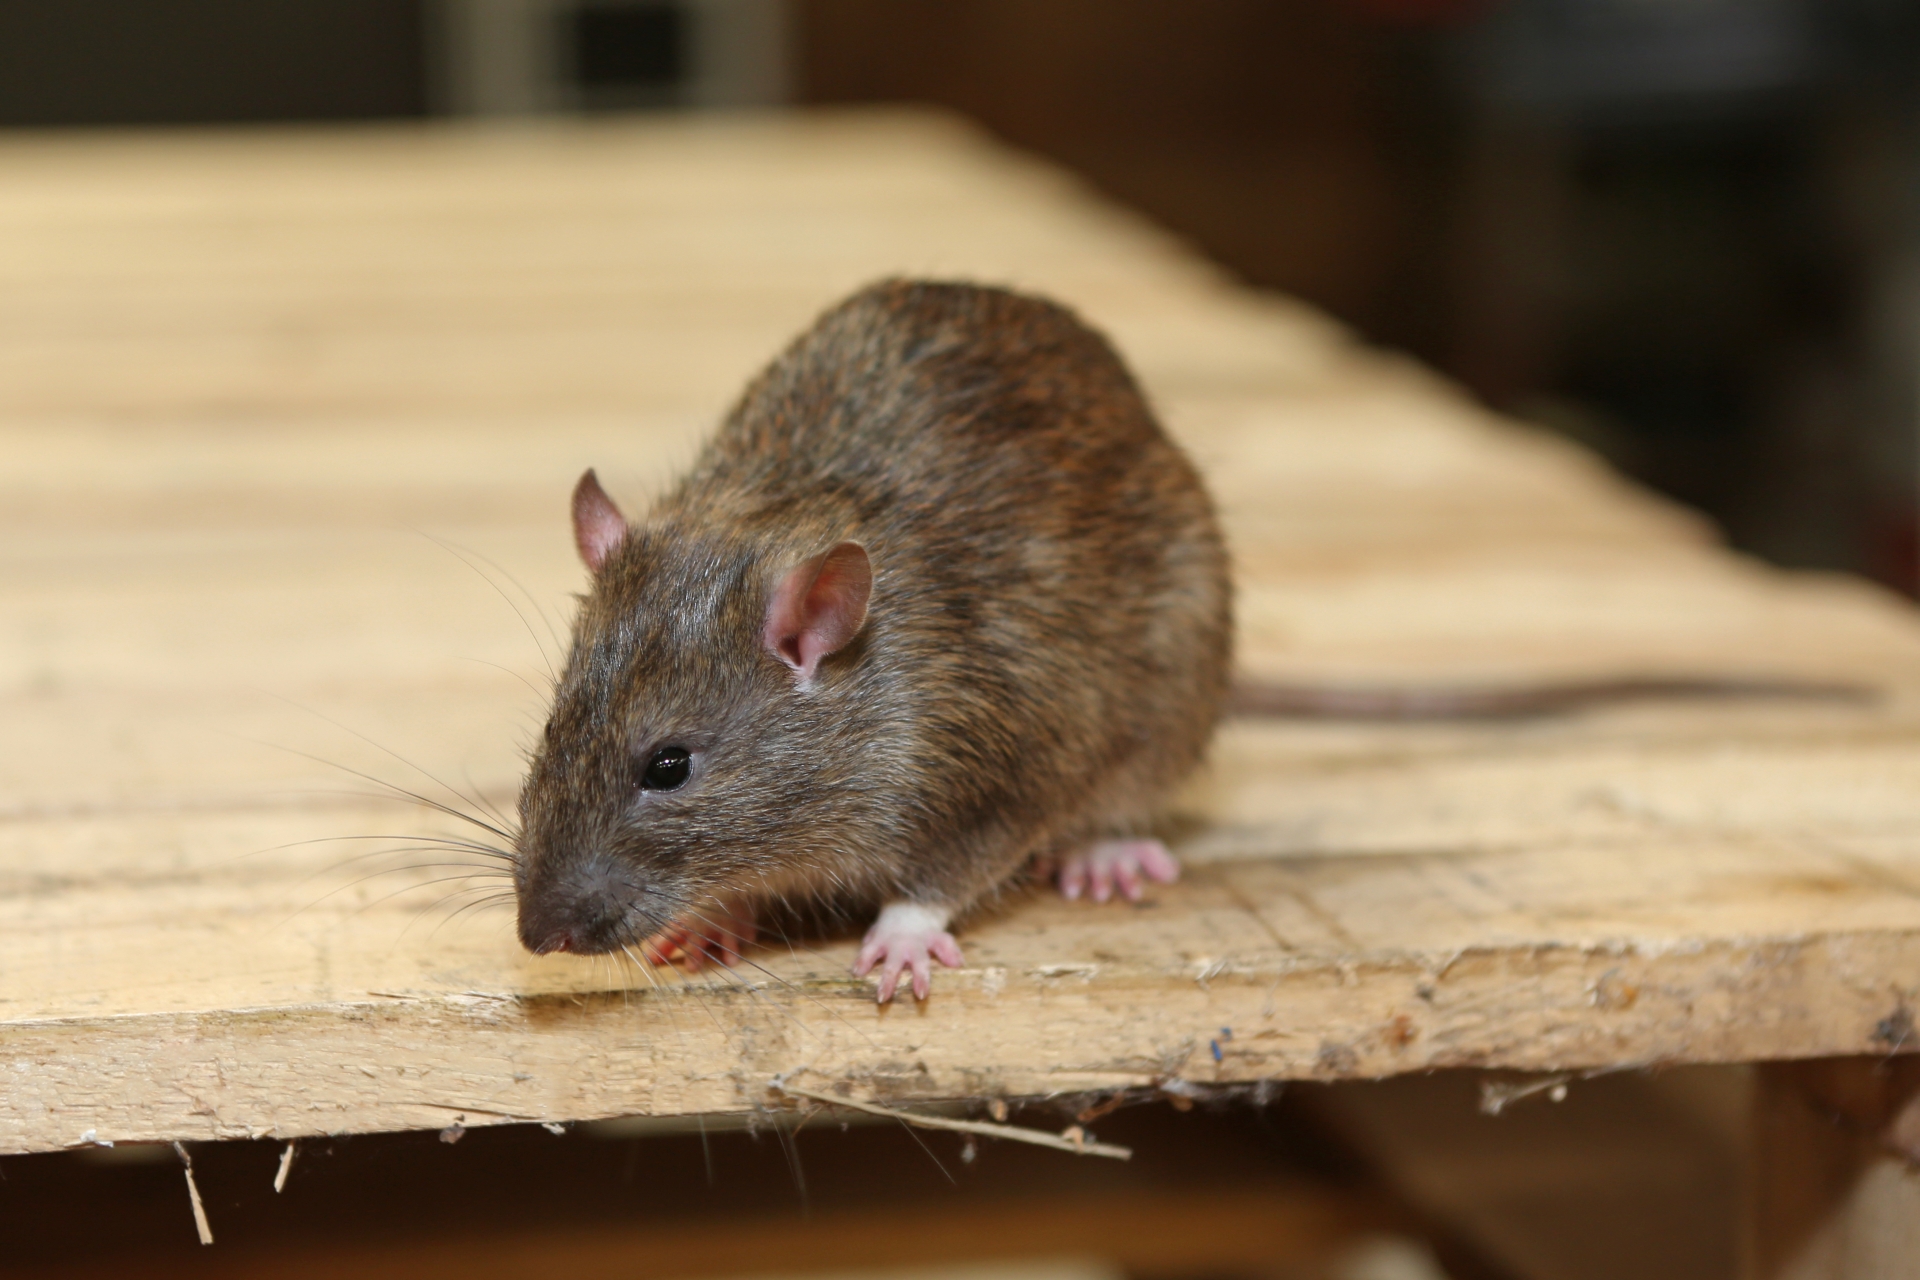 Rat Infestation, Pest Control in Headley, KT18. Call Now 020 8166 9746